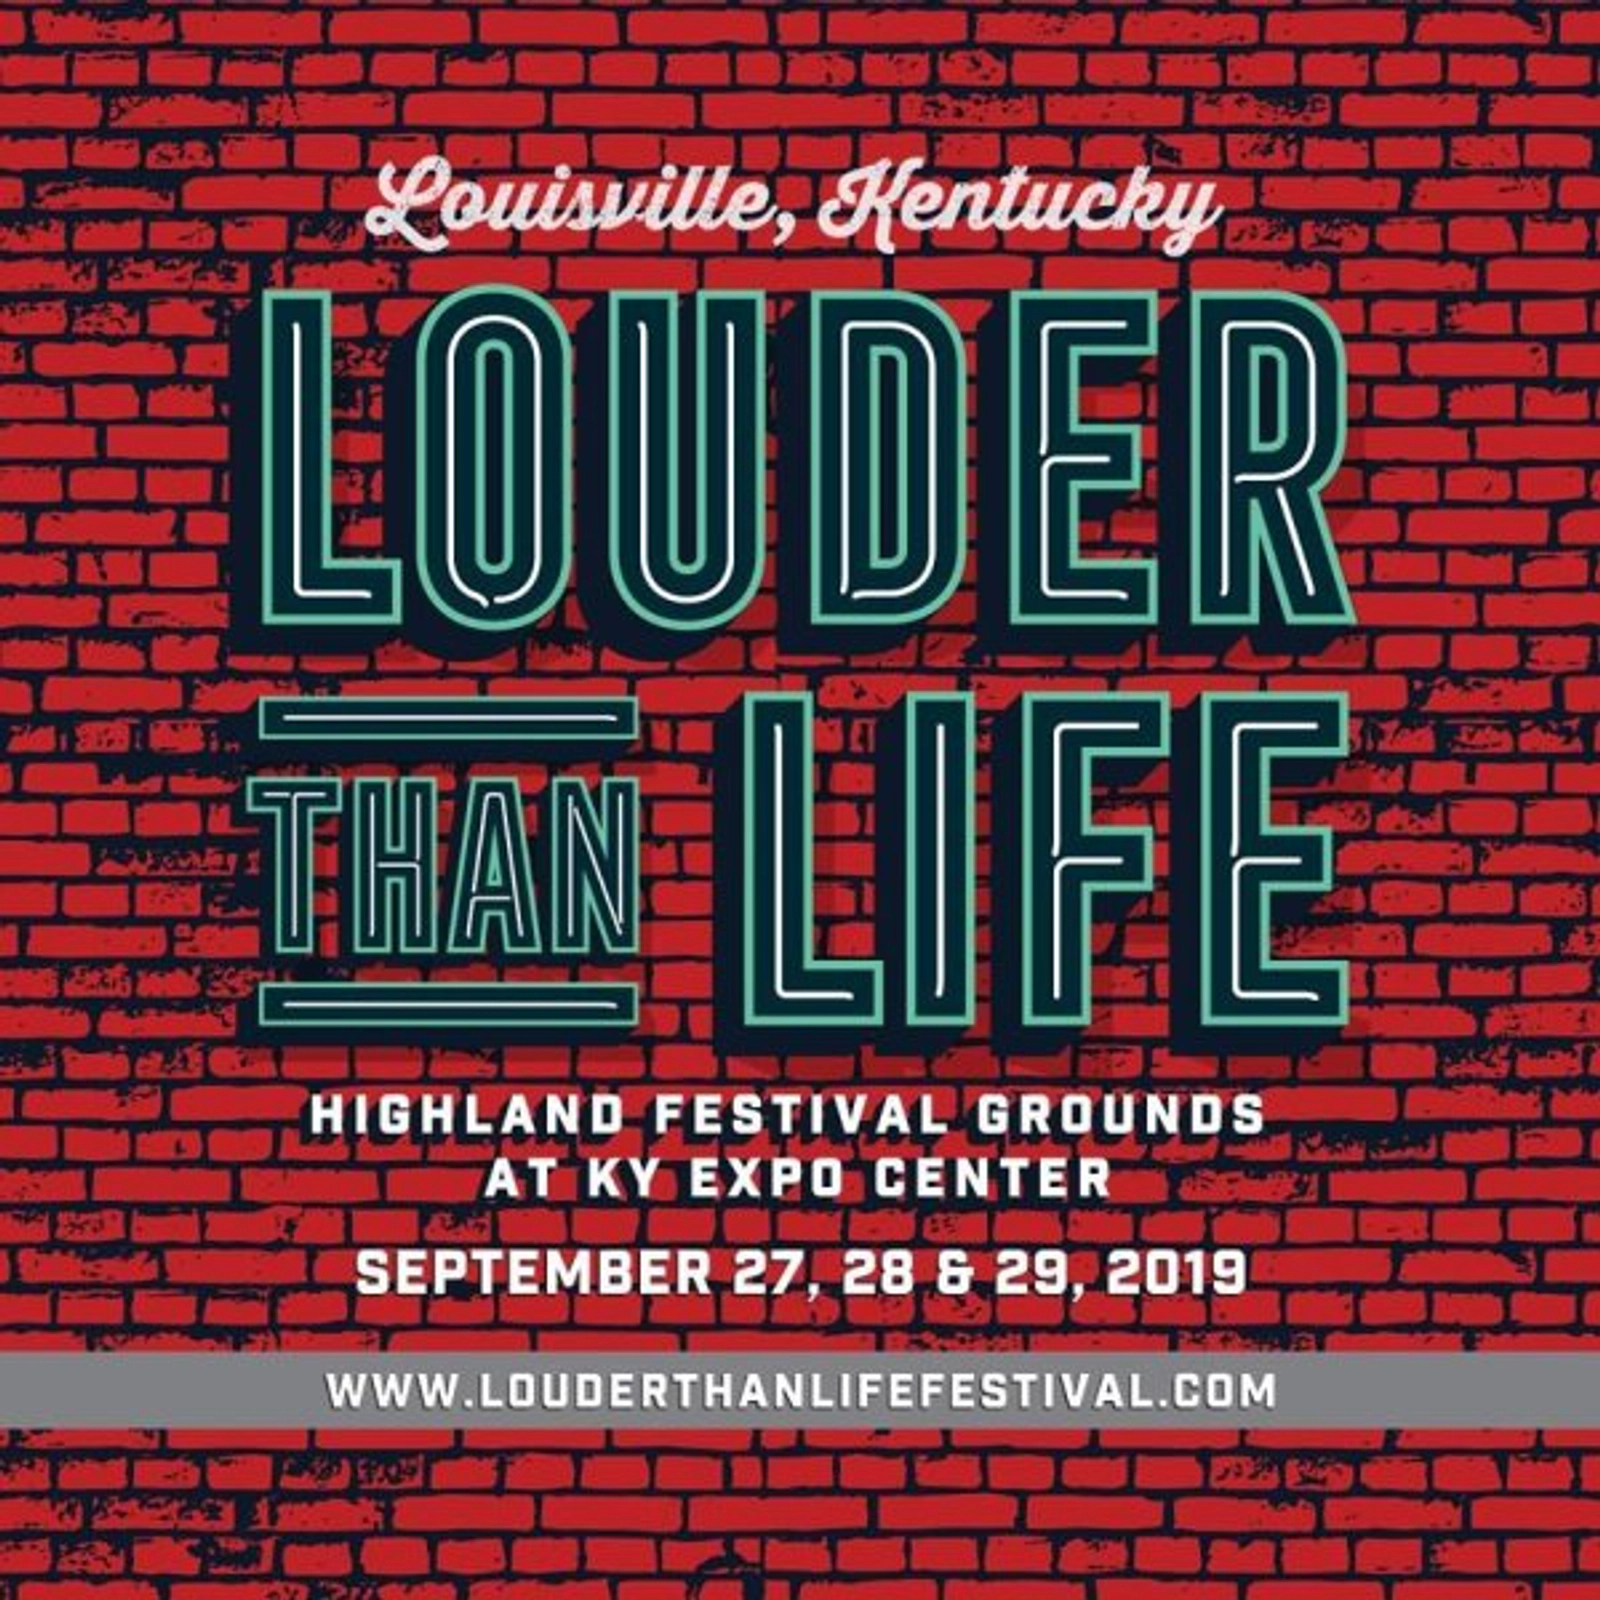 Win tickets to Louder Than Life 2019 in Louisville, KY! - Thumbnail Image